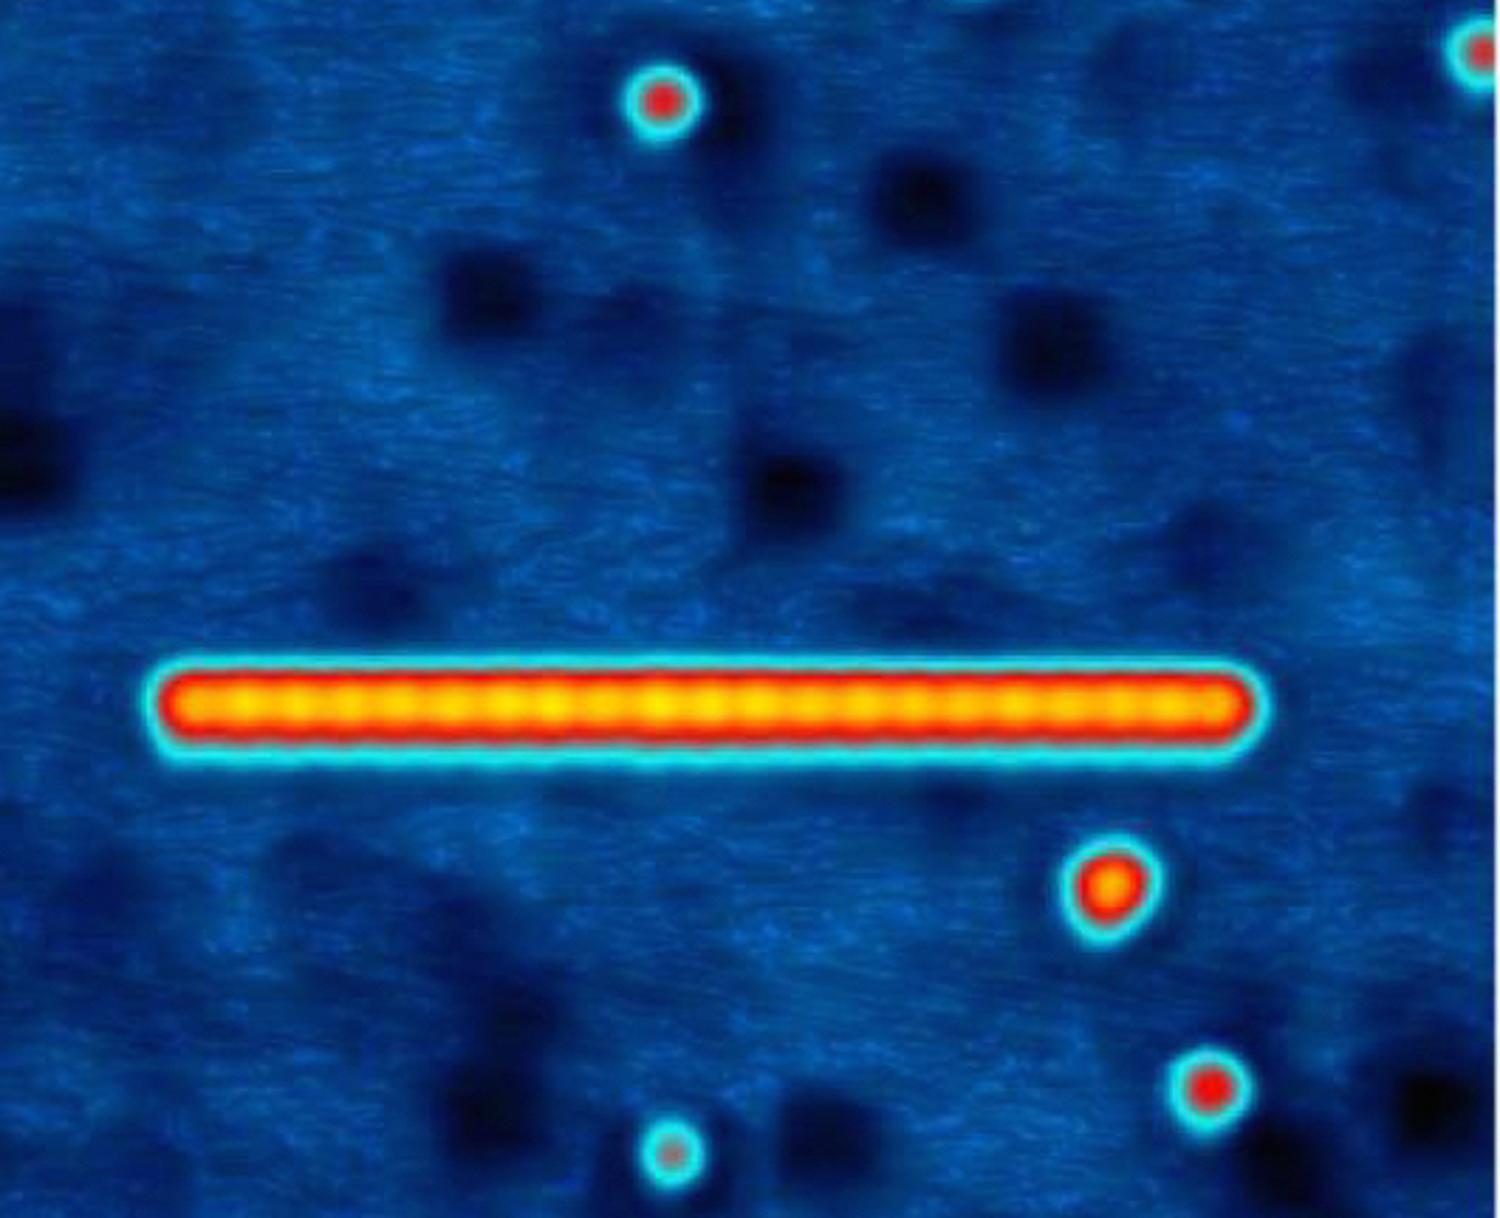 Image of a chain of 21 Manganese atoms on a superconducting material (Bi2Pd), built atom by atom using the tip of the STM